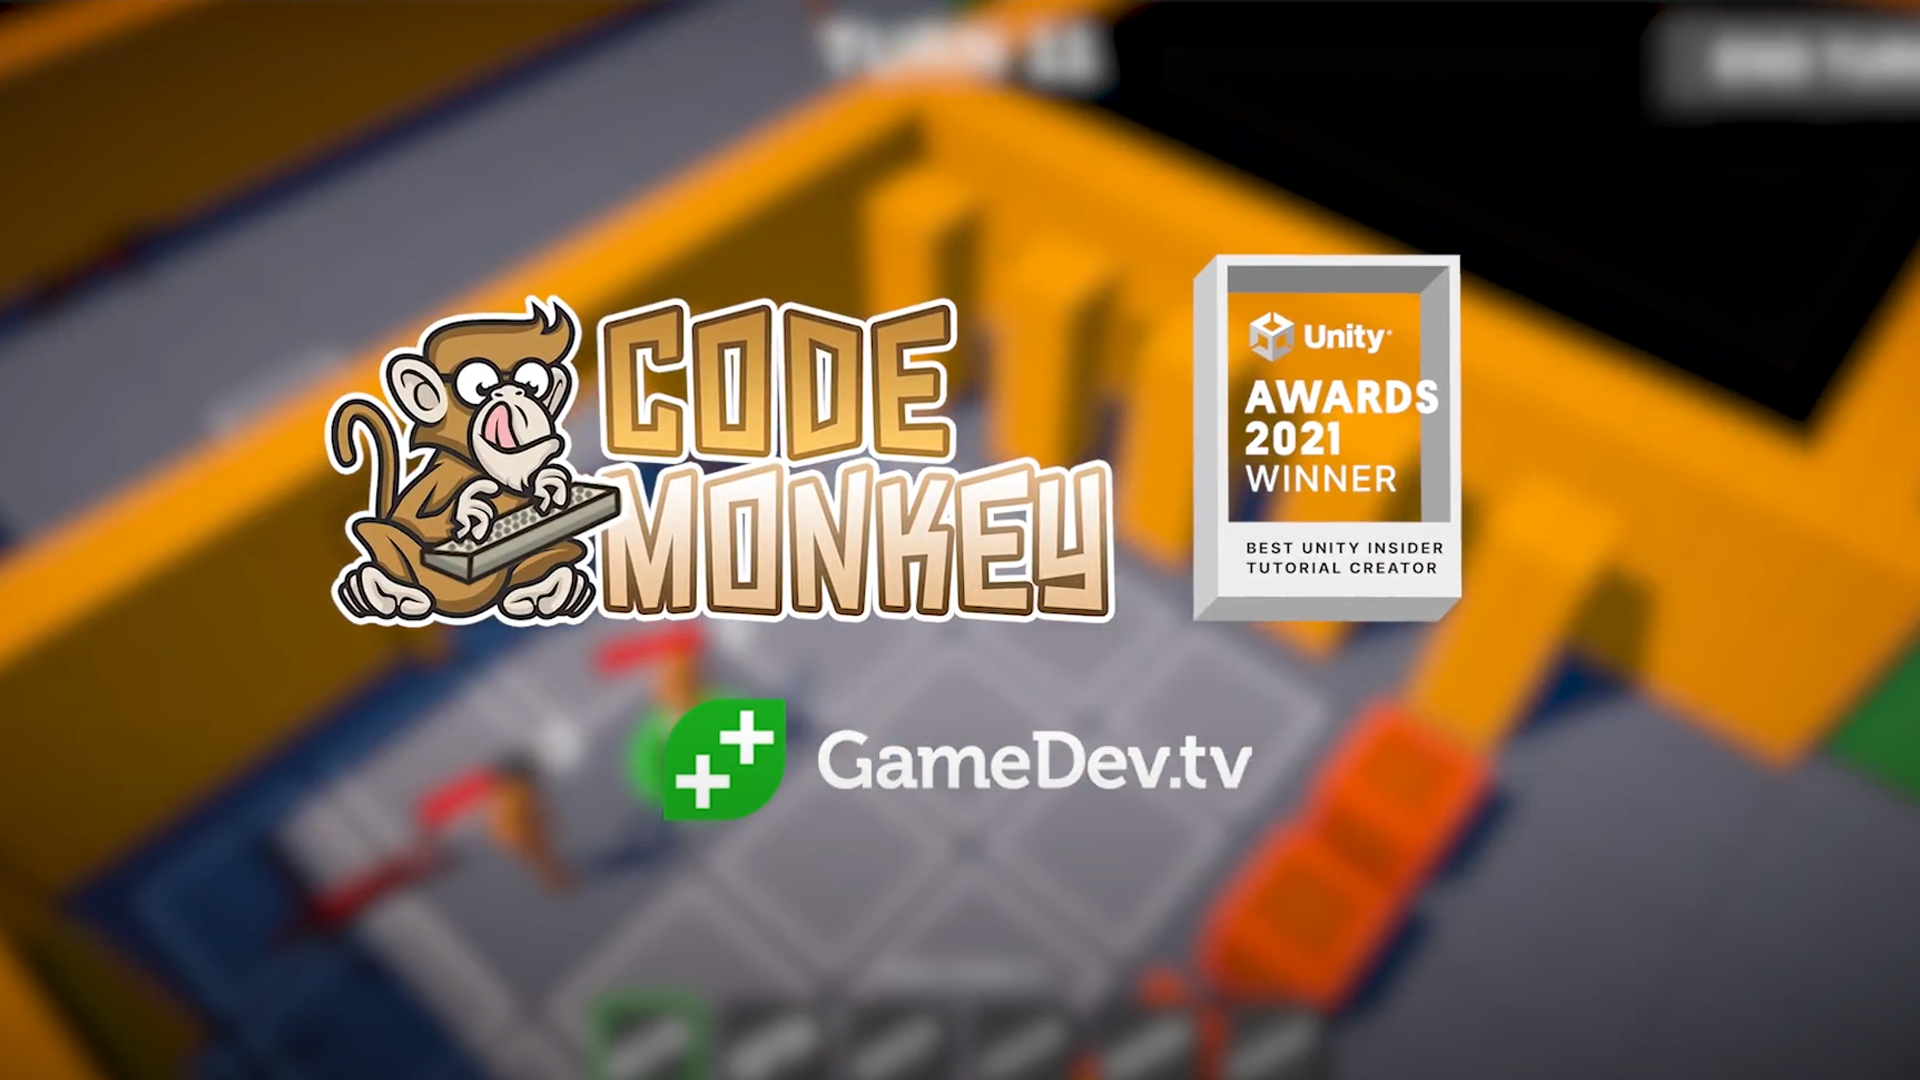 How To Get Better at Coding with Code Monkey